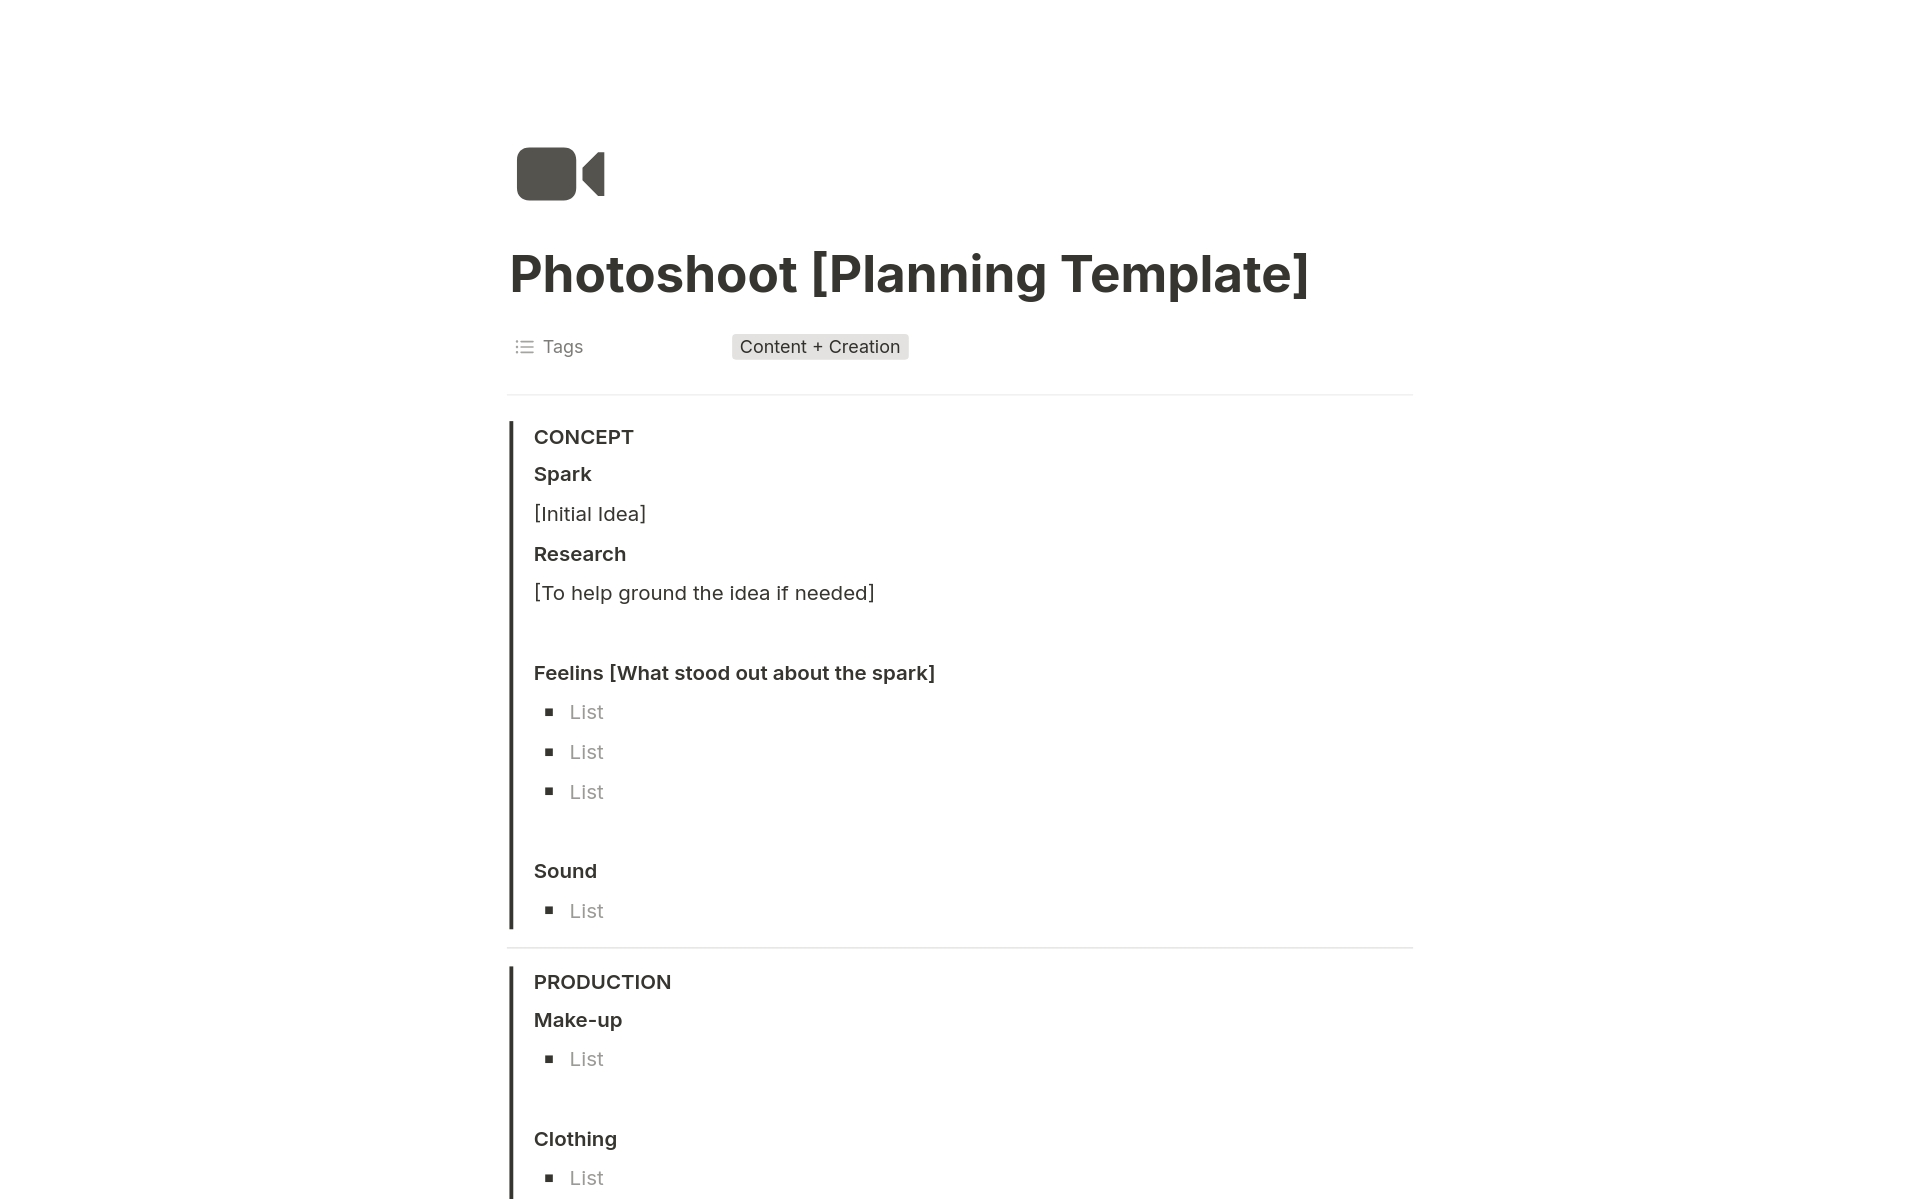 Capture the perfect shot with ease using this comprehensive photoshoot planning template on Notion.